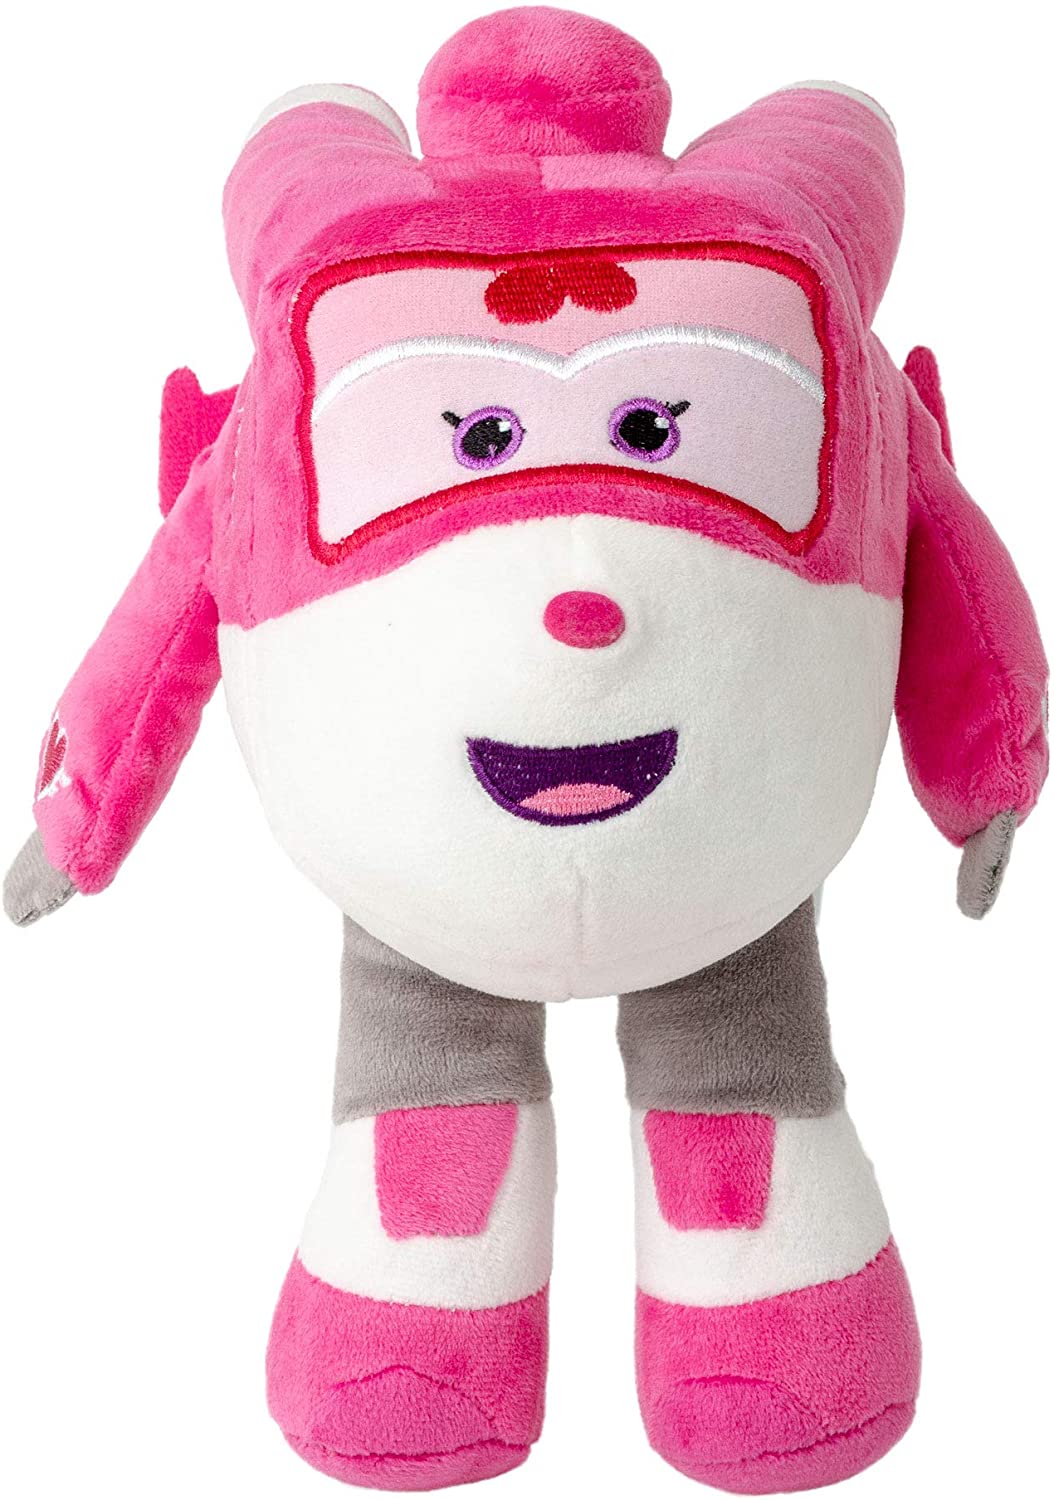 Super Wings 26 cm Airplane Plush Figures Stuffed for Collecting, and Cuddling, Jett, Jerome, Dizzy or Donnie for Girls and Boys (Dizzy, pink) – TopToy